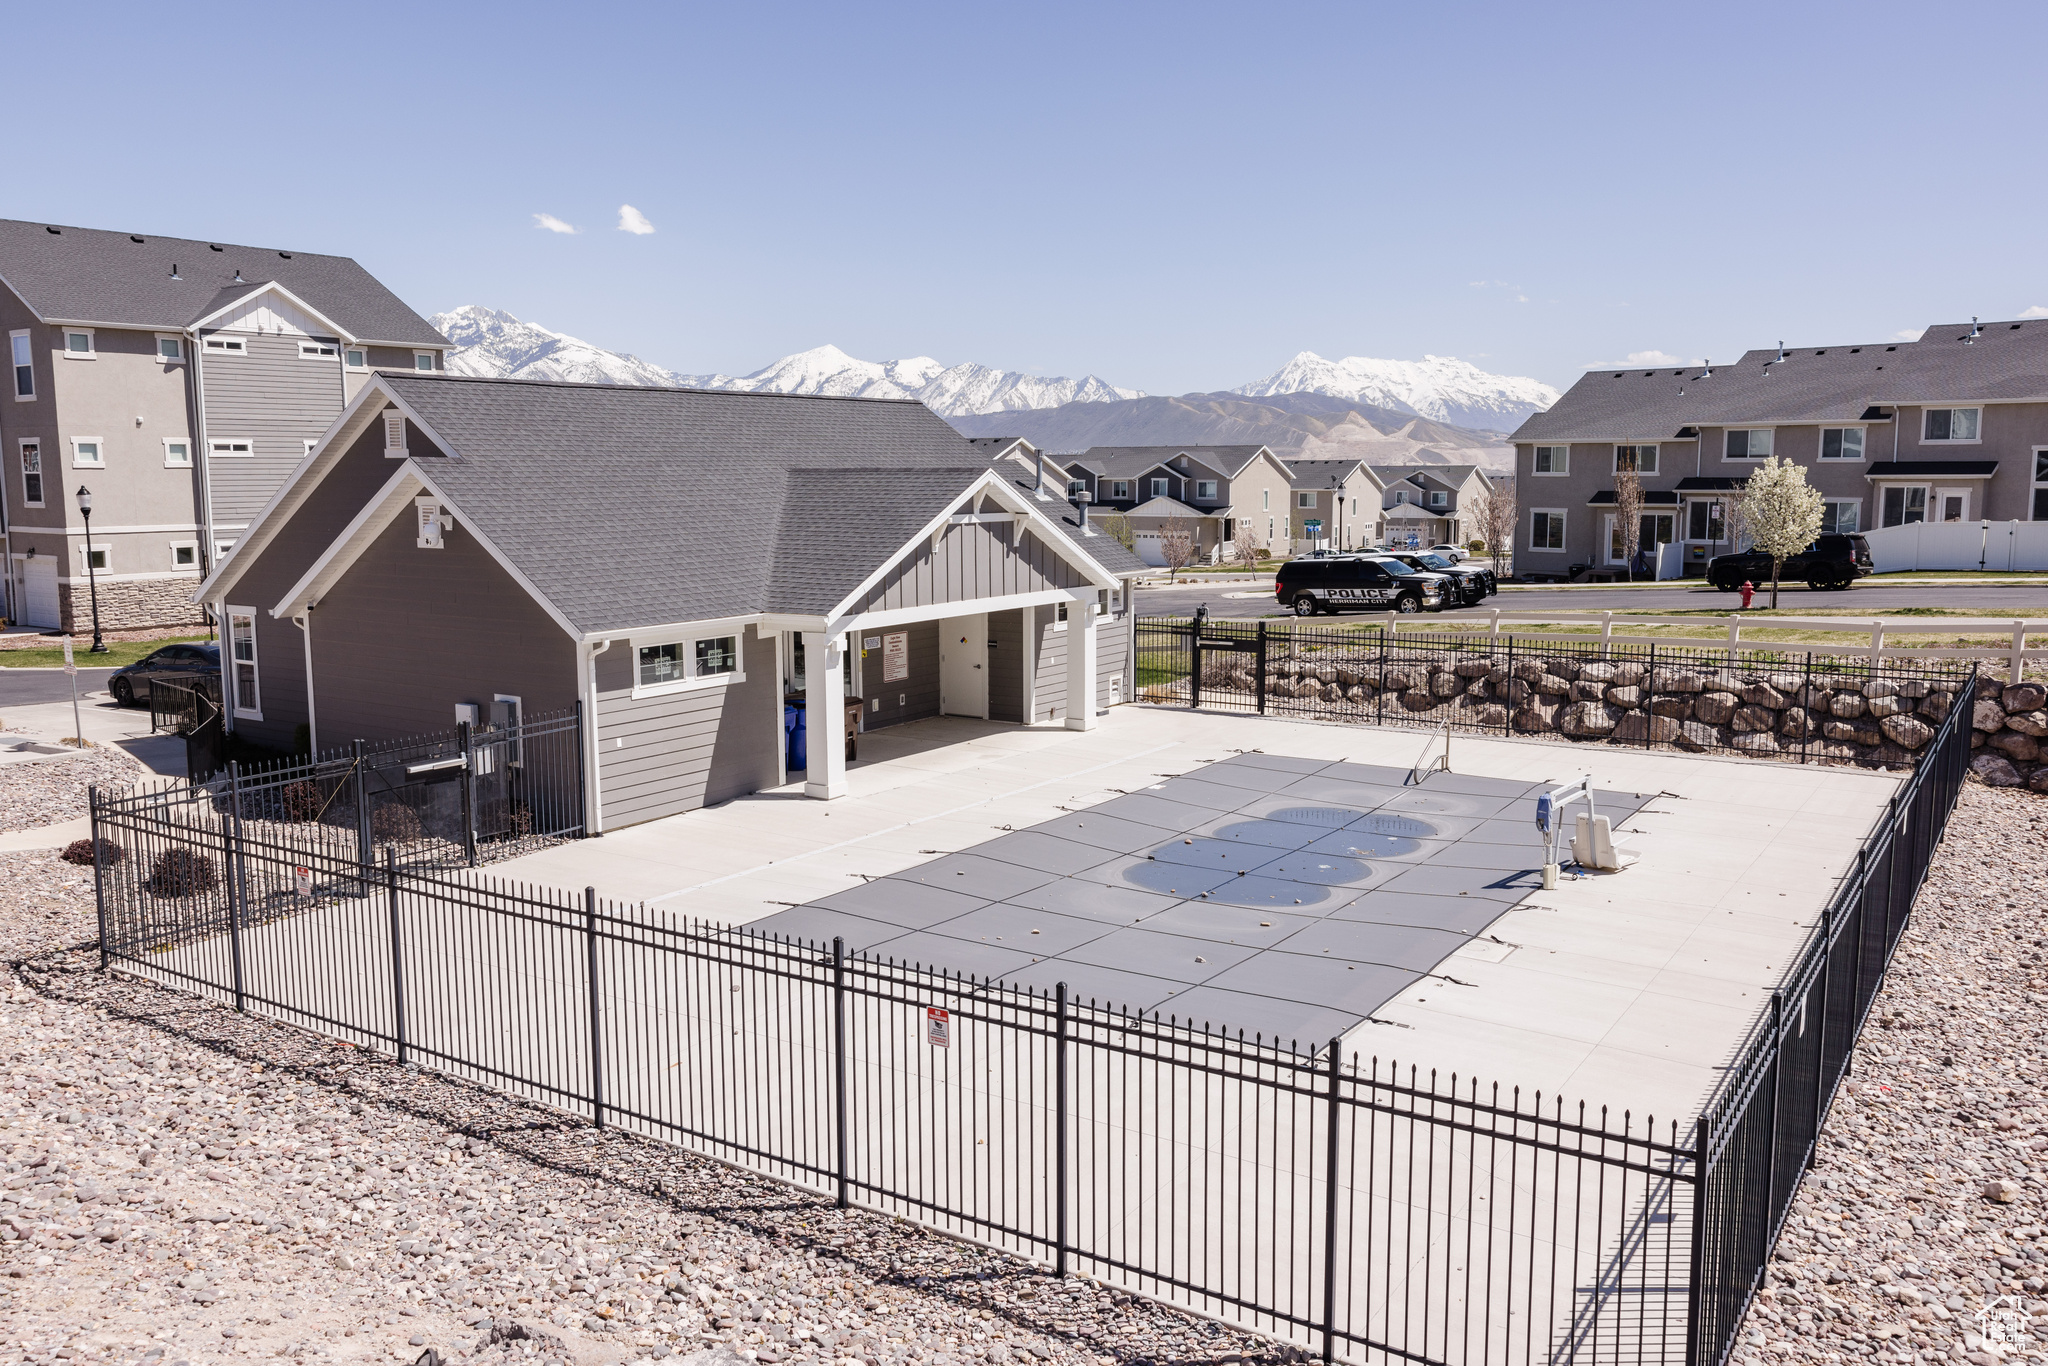 Exterior space featuring a mountain view and a garage